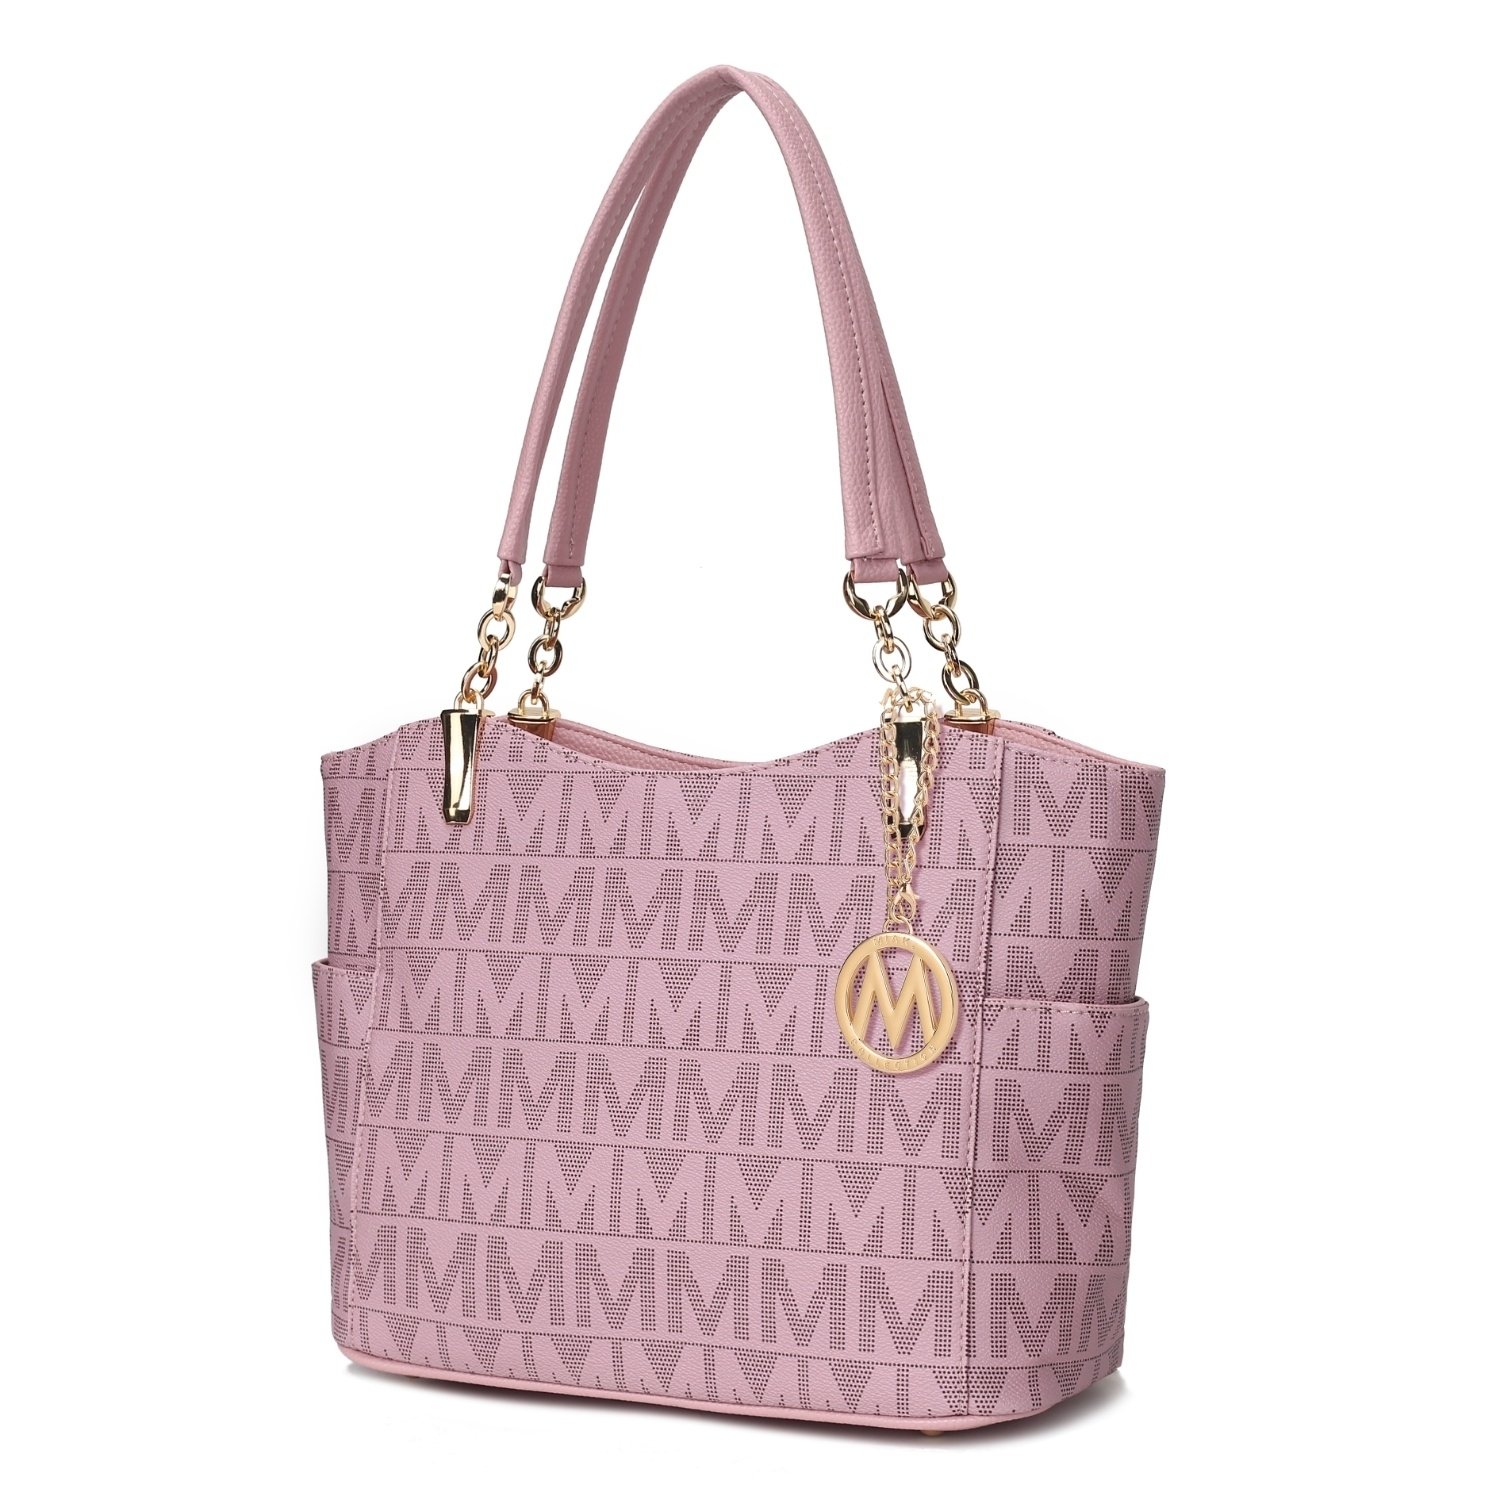 MKF Collection Braylee M Signature Tote Handbag By Mia K. - Dusty Rose